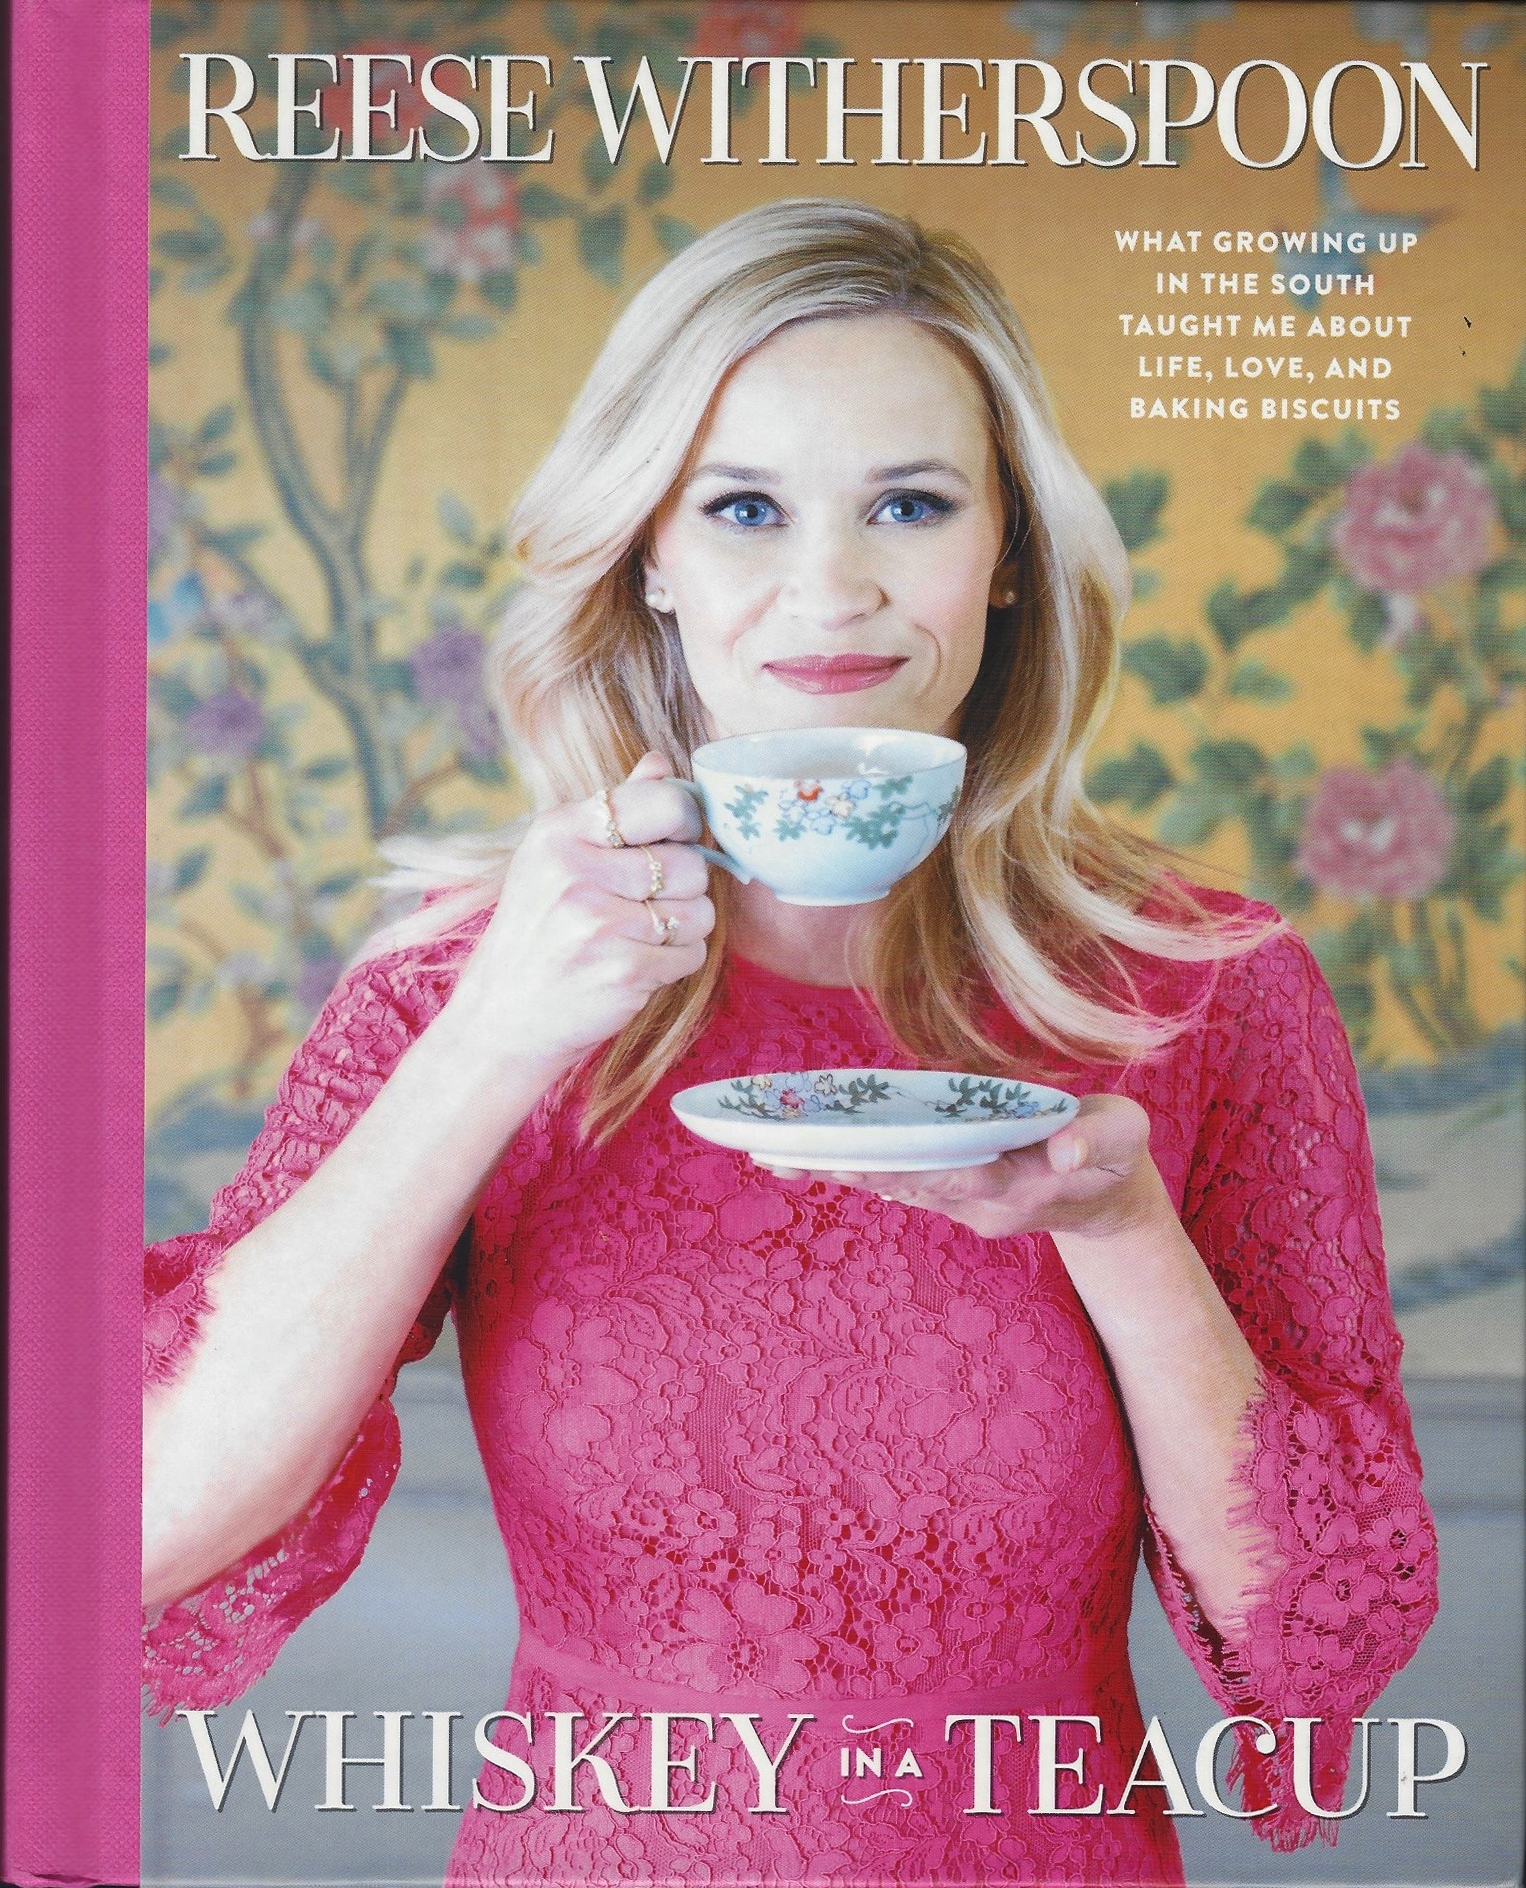 Whiskey in a Teacup by Reese Witherspoon